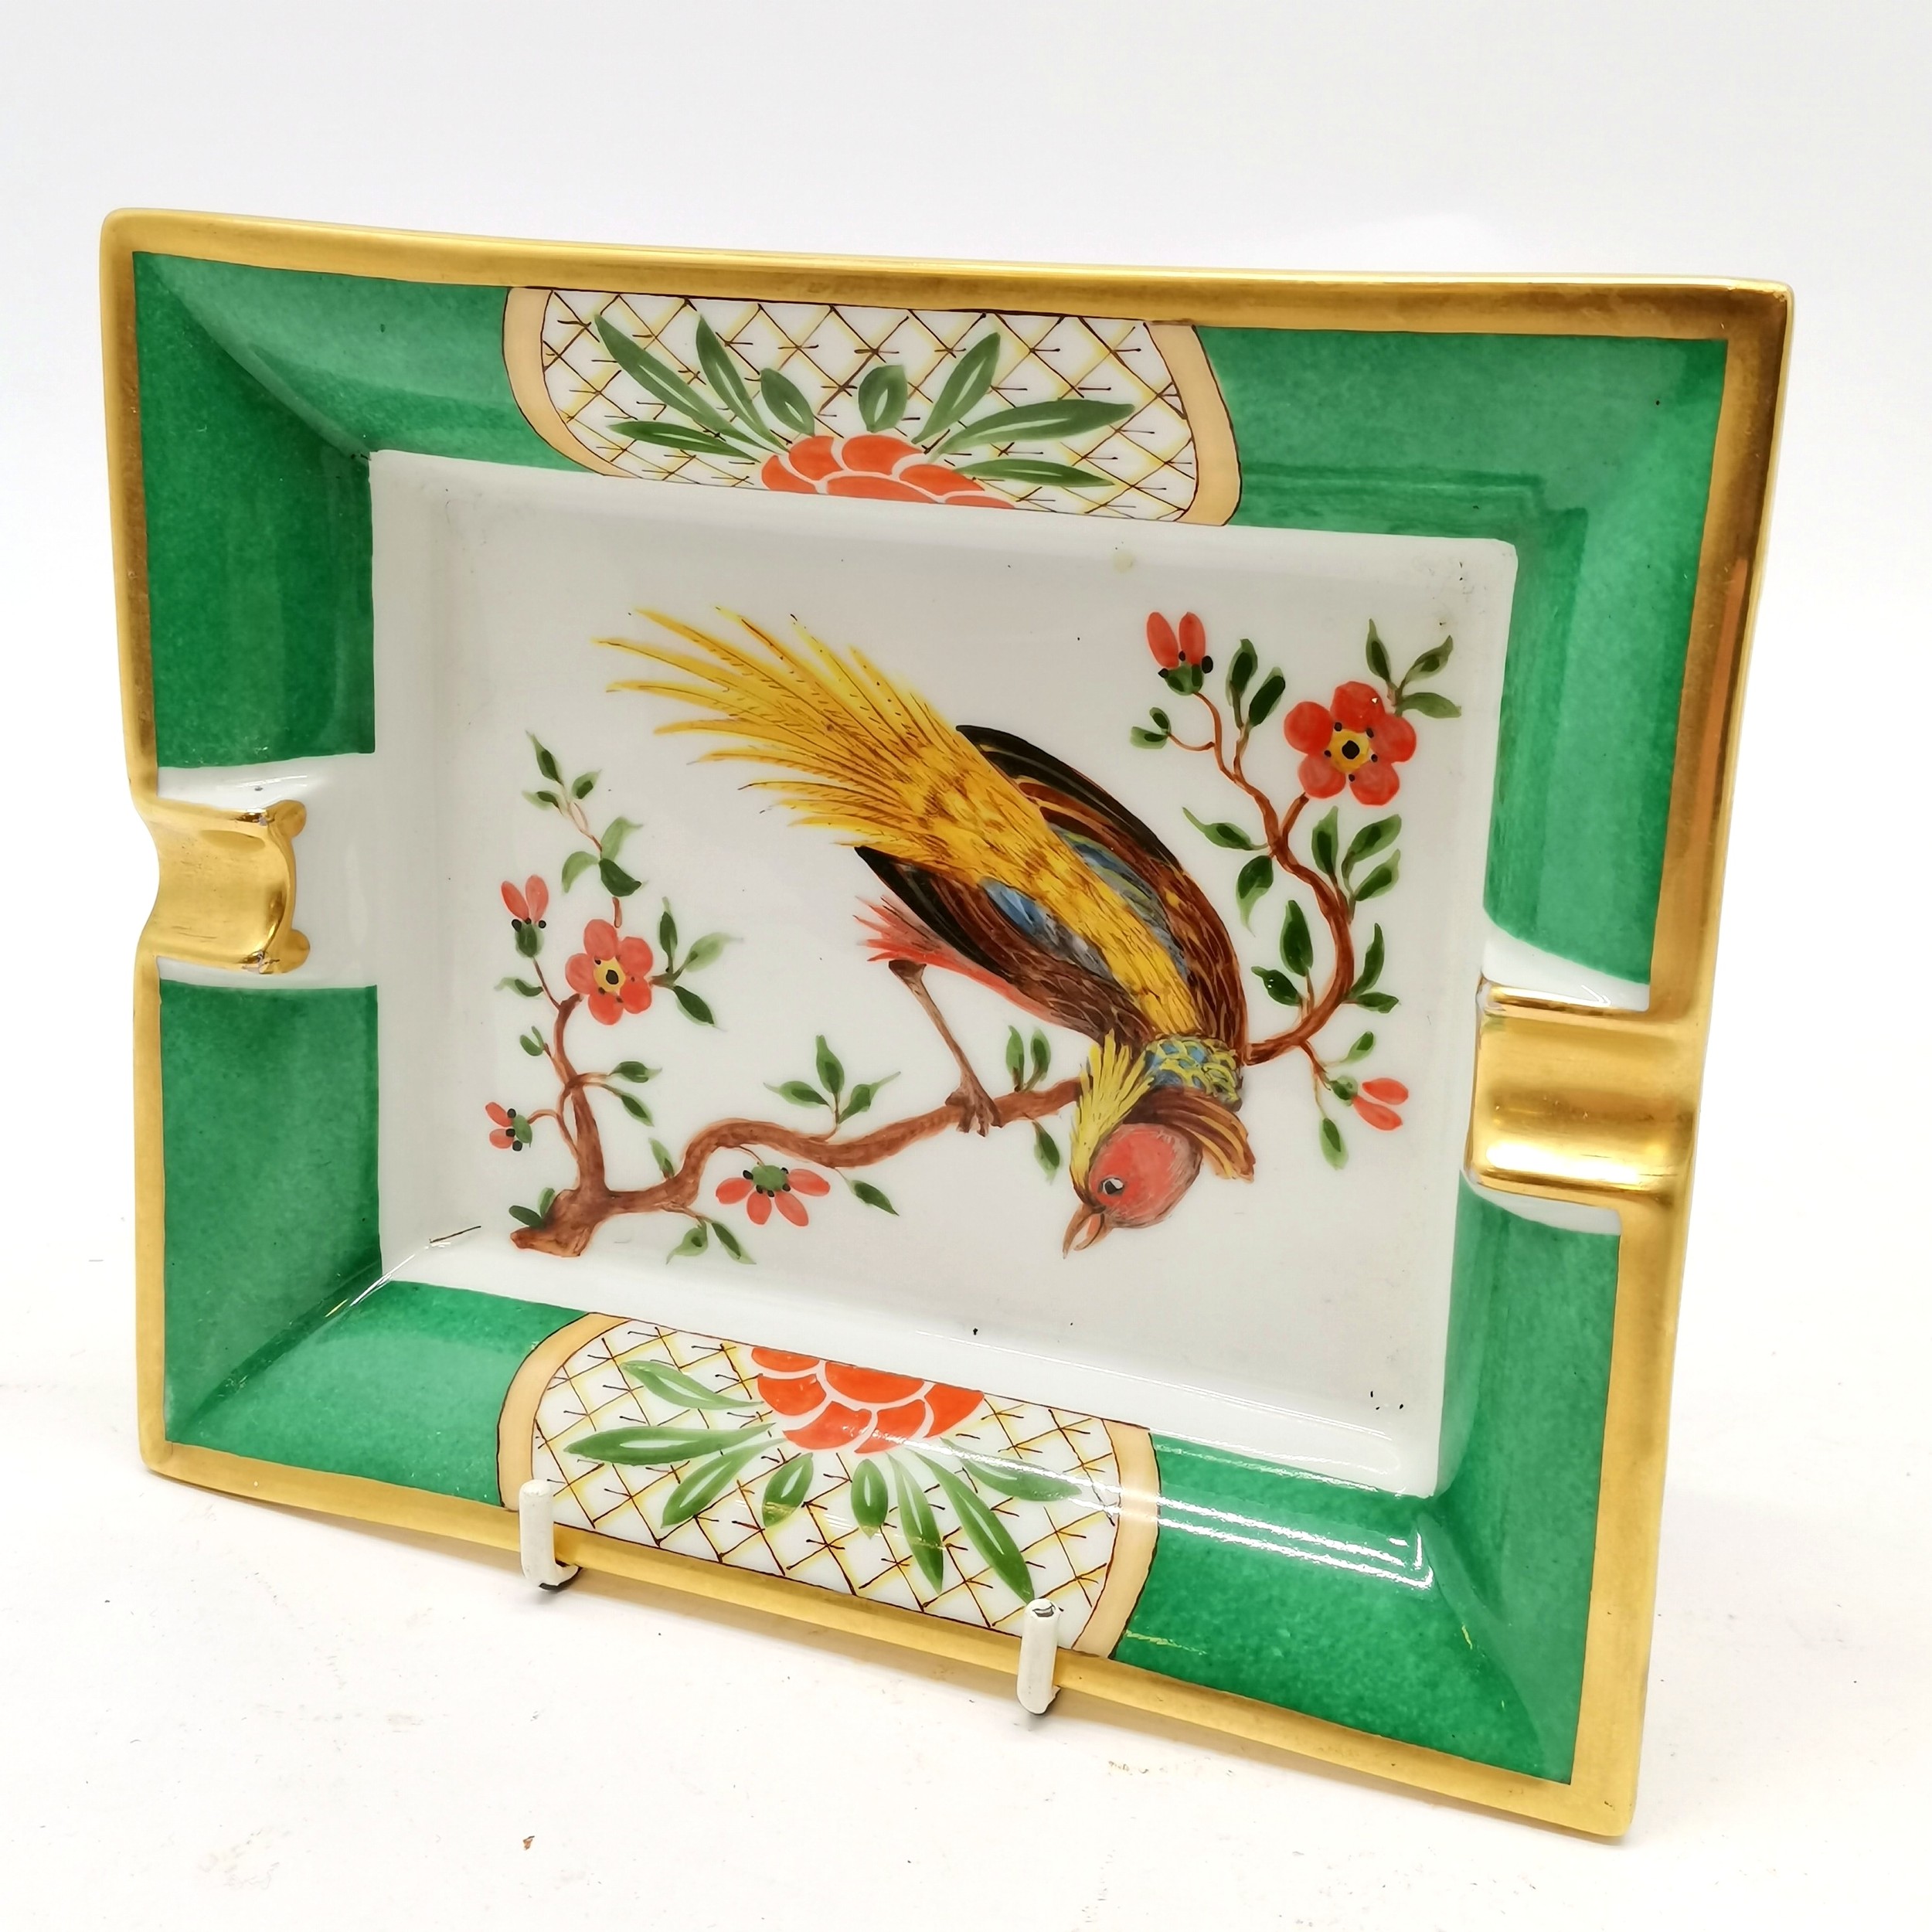 Hermes Paris Made in France Porcelain ash tray, decorated with exotic bird within green and floral